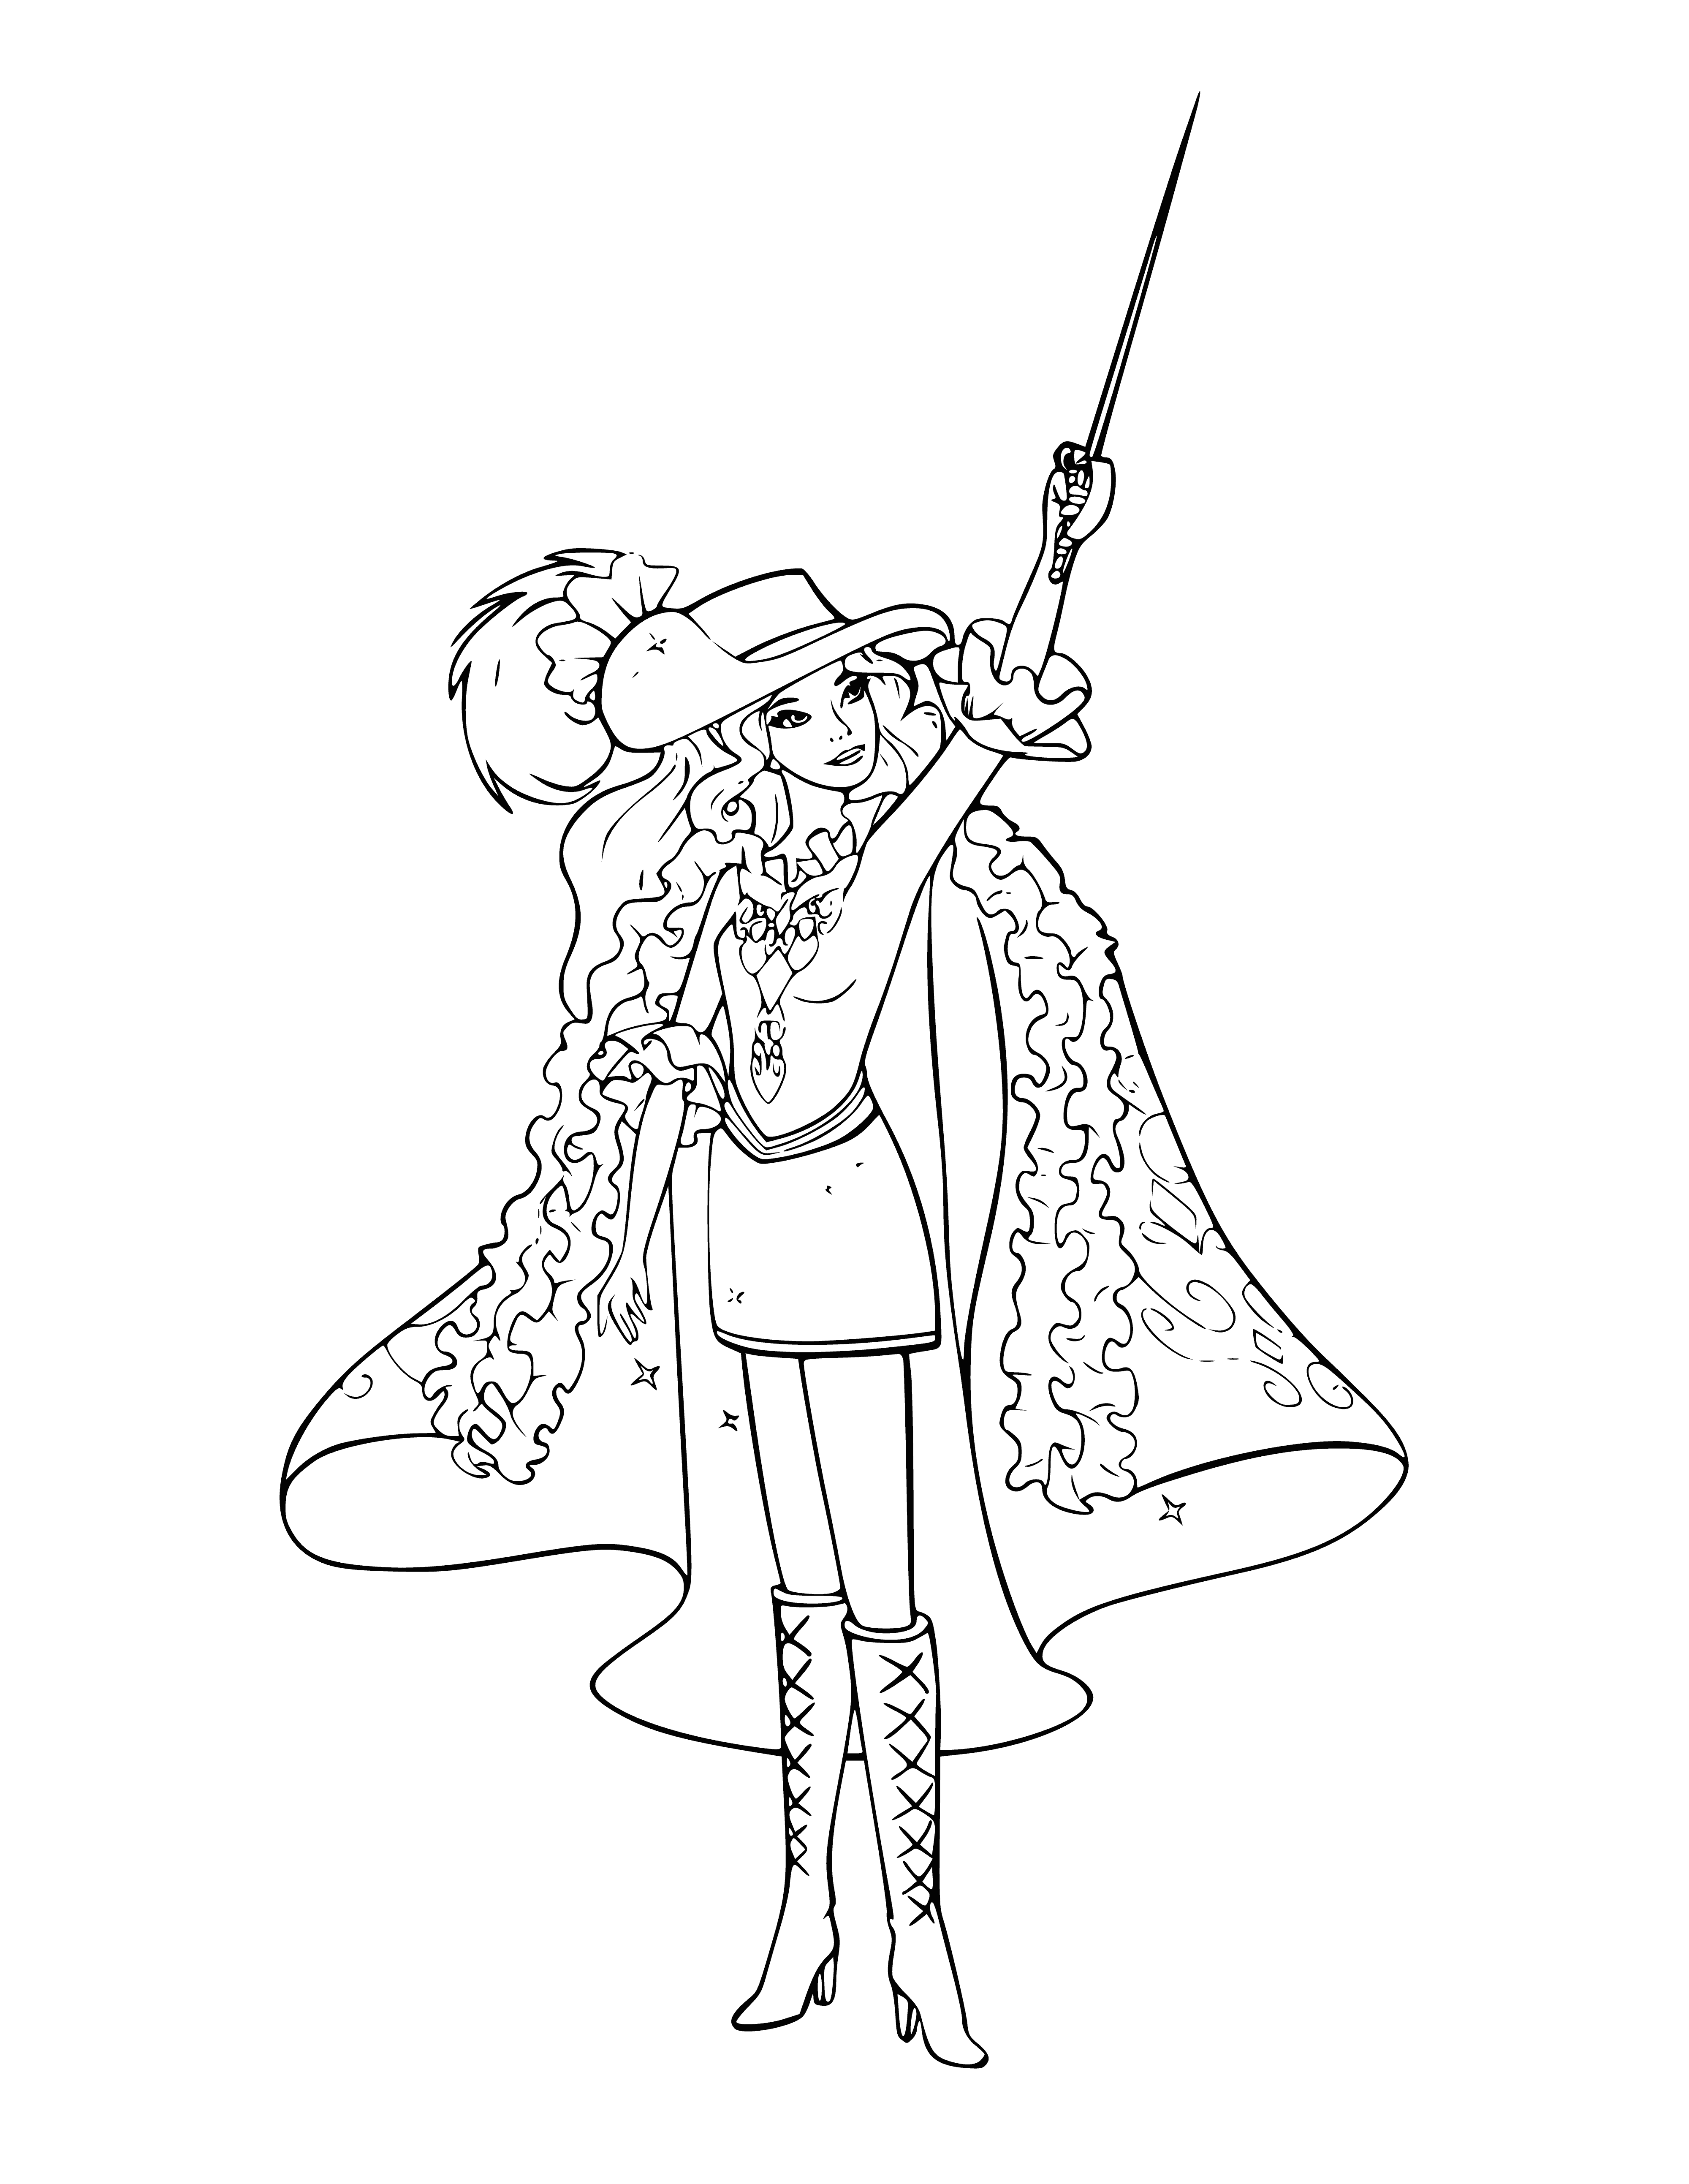 coloring page: Aramina is a Barbie musketeer holding a sword and has blonde hair. #BarbieLife #GirlPower